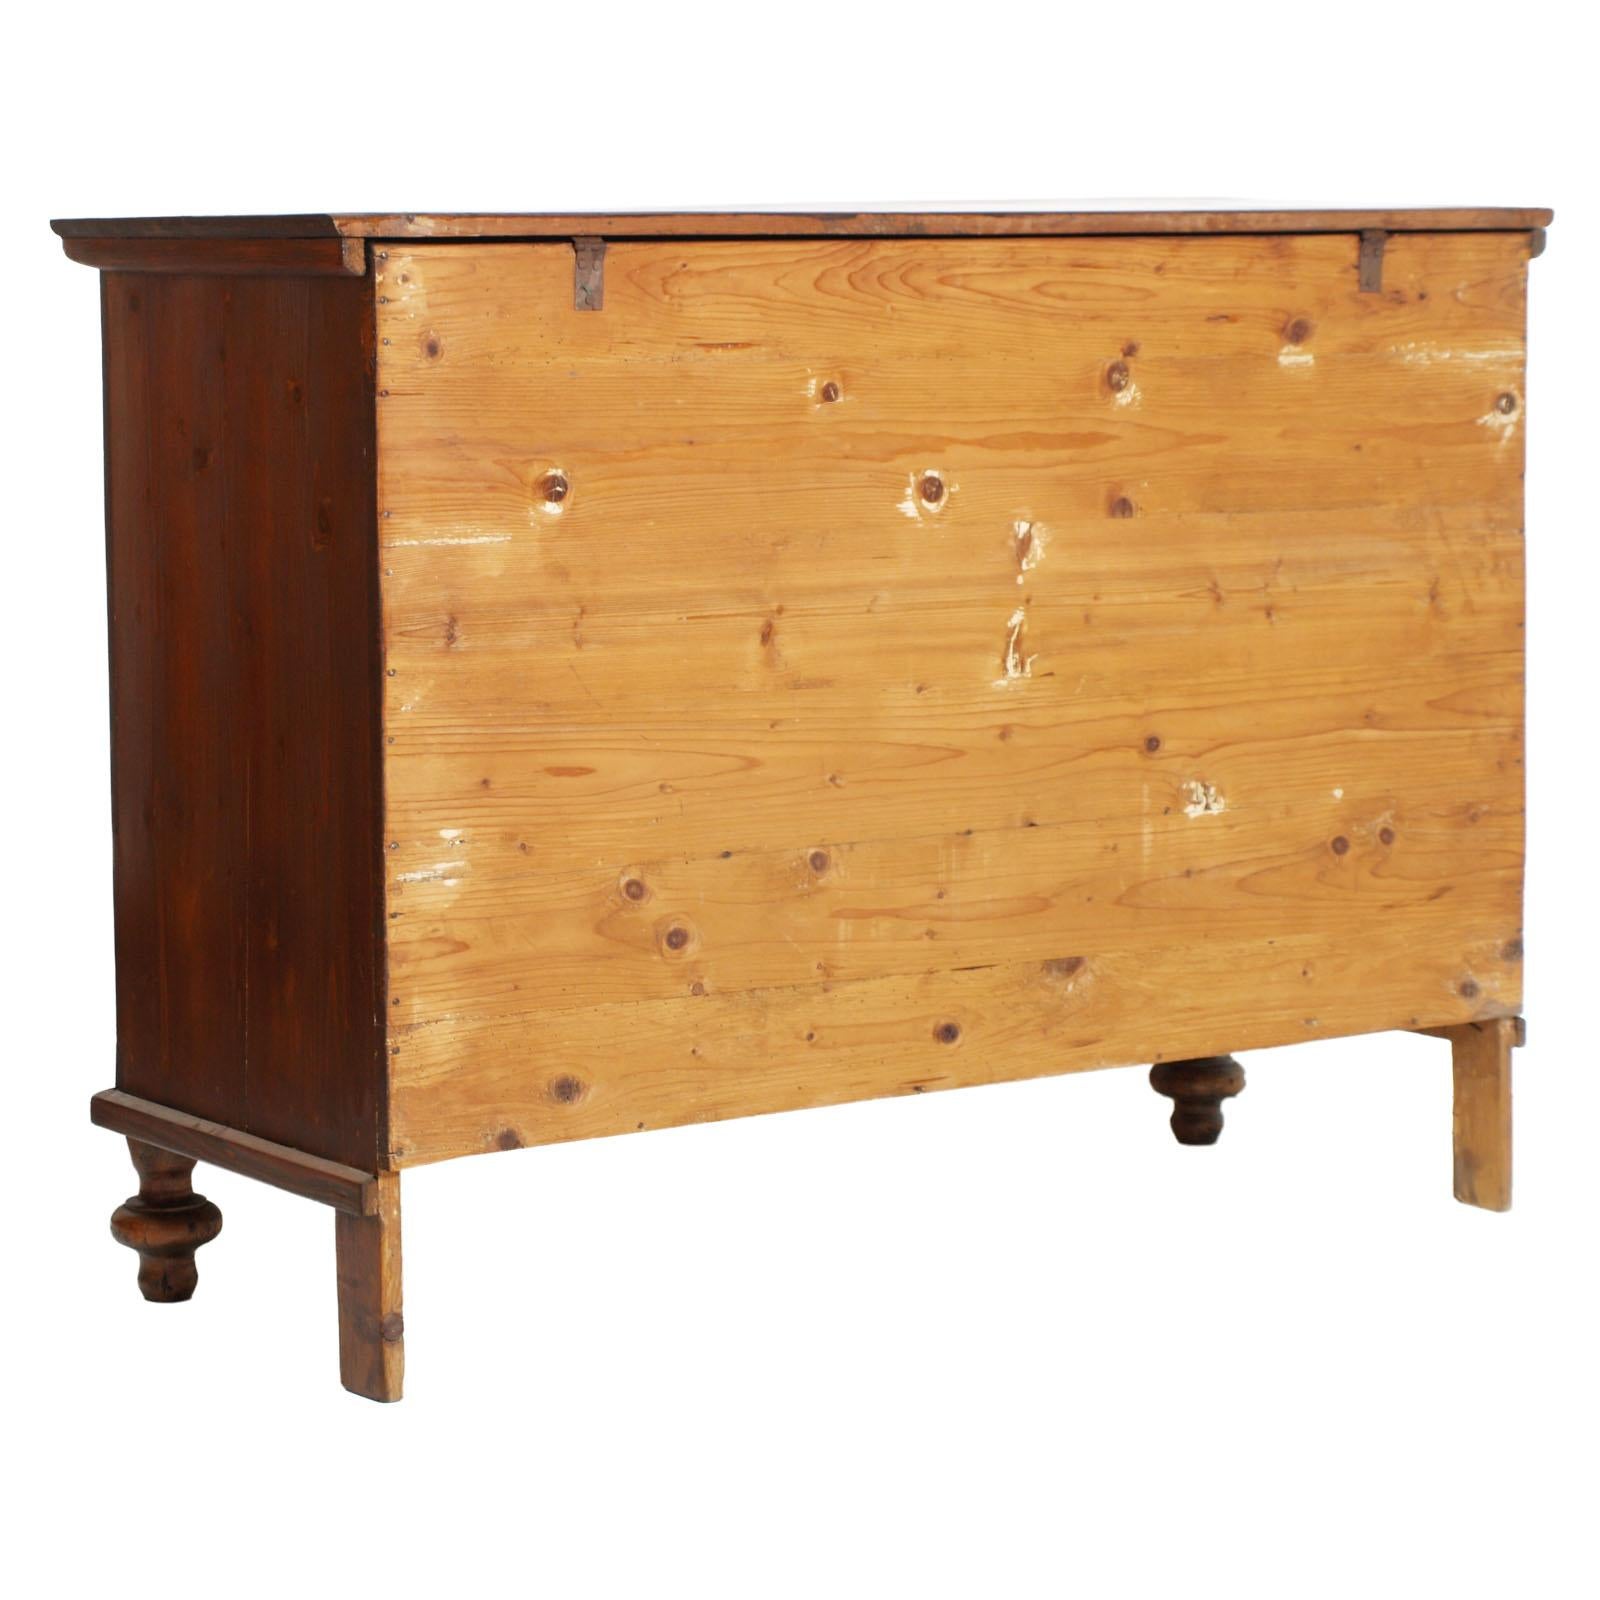 19th Century, Country Sideboard with Drover, in massive wood, Wax Polished For Sale 2